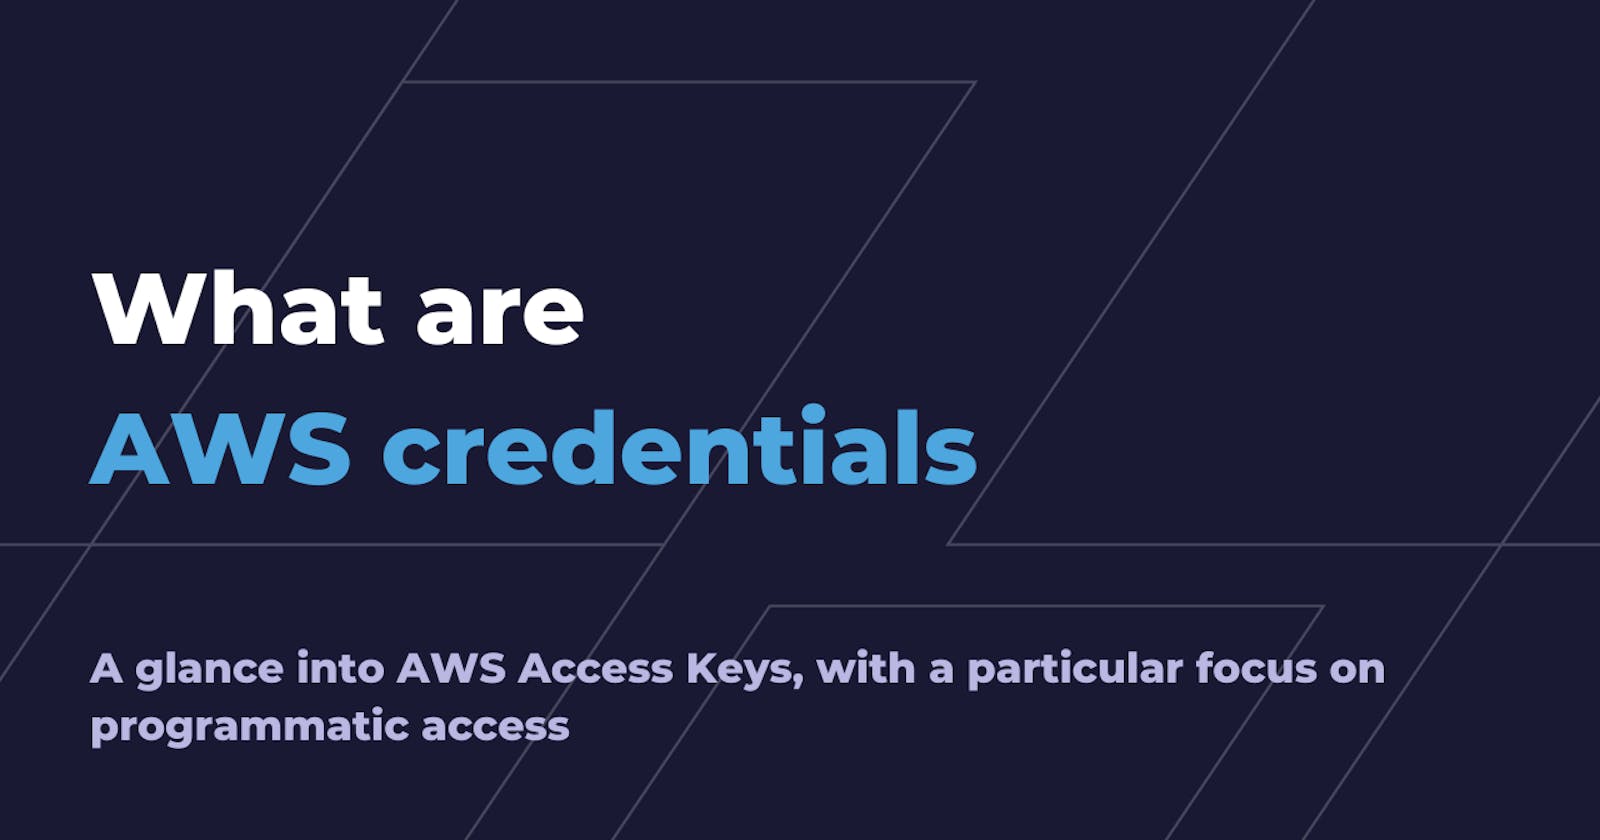 What are AWS credentials?